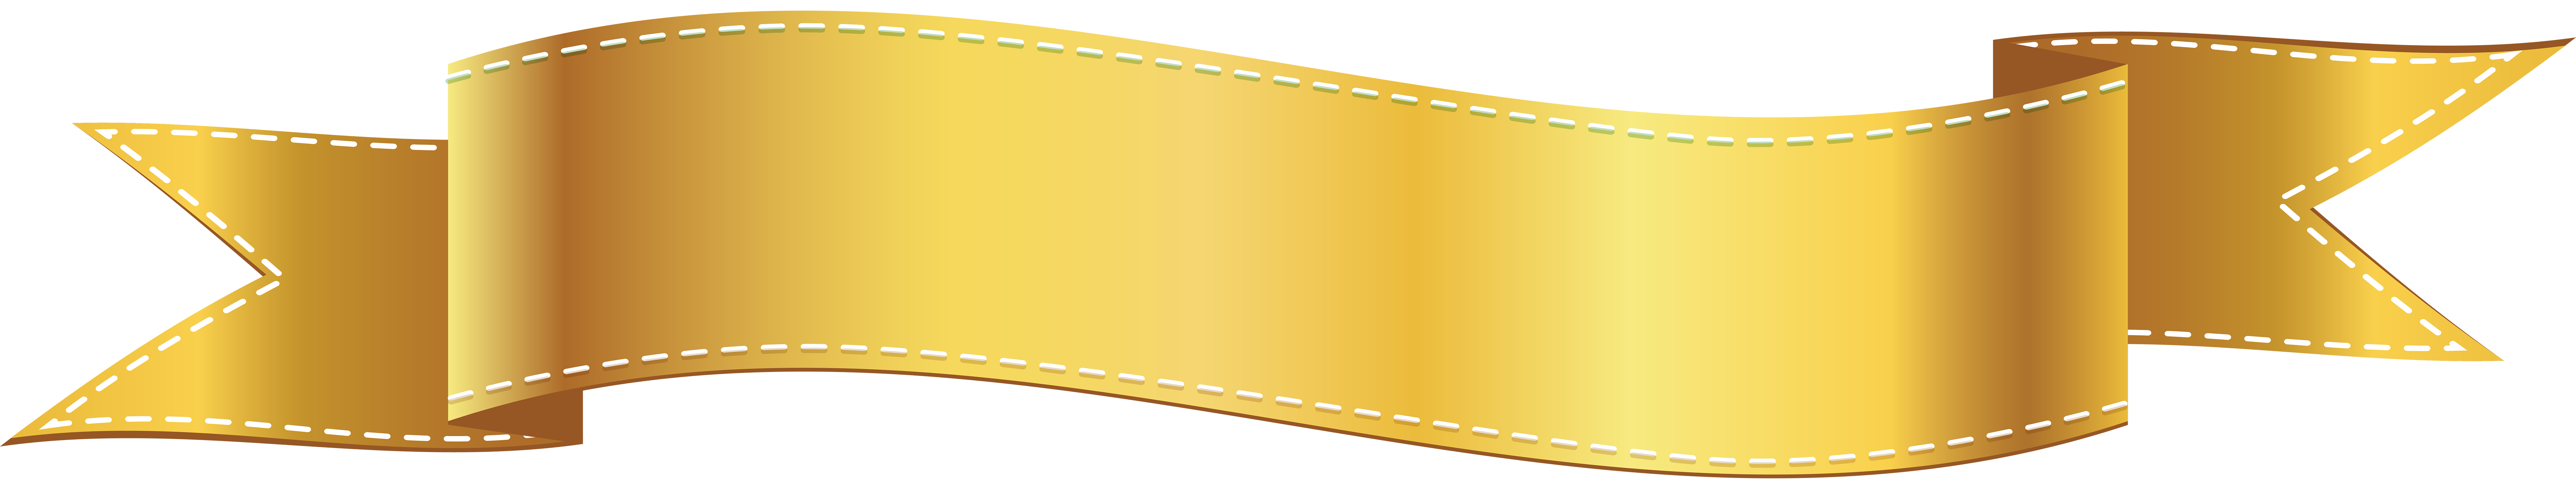 pennant clipart yellow